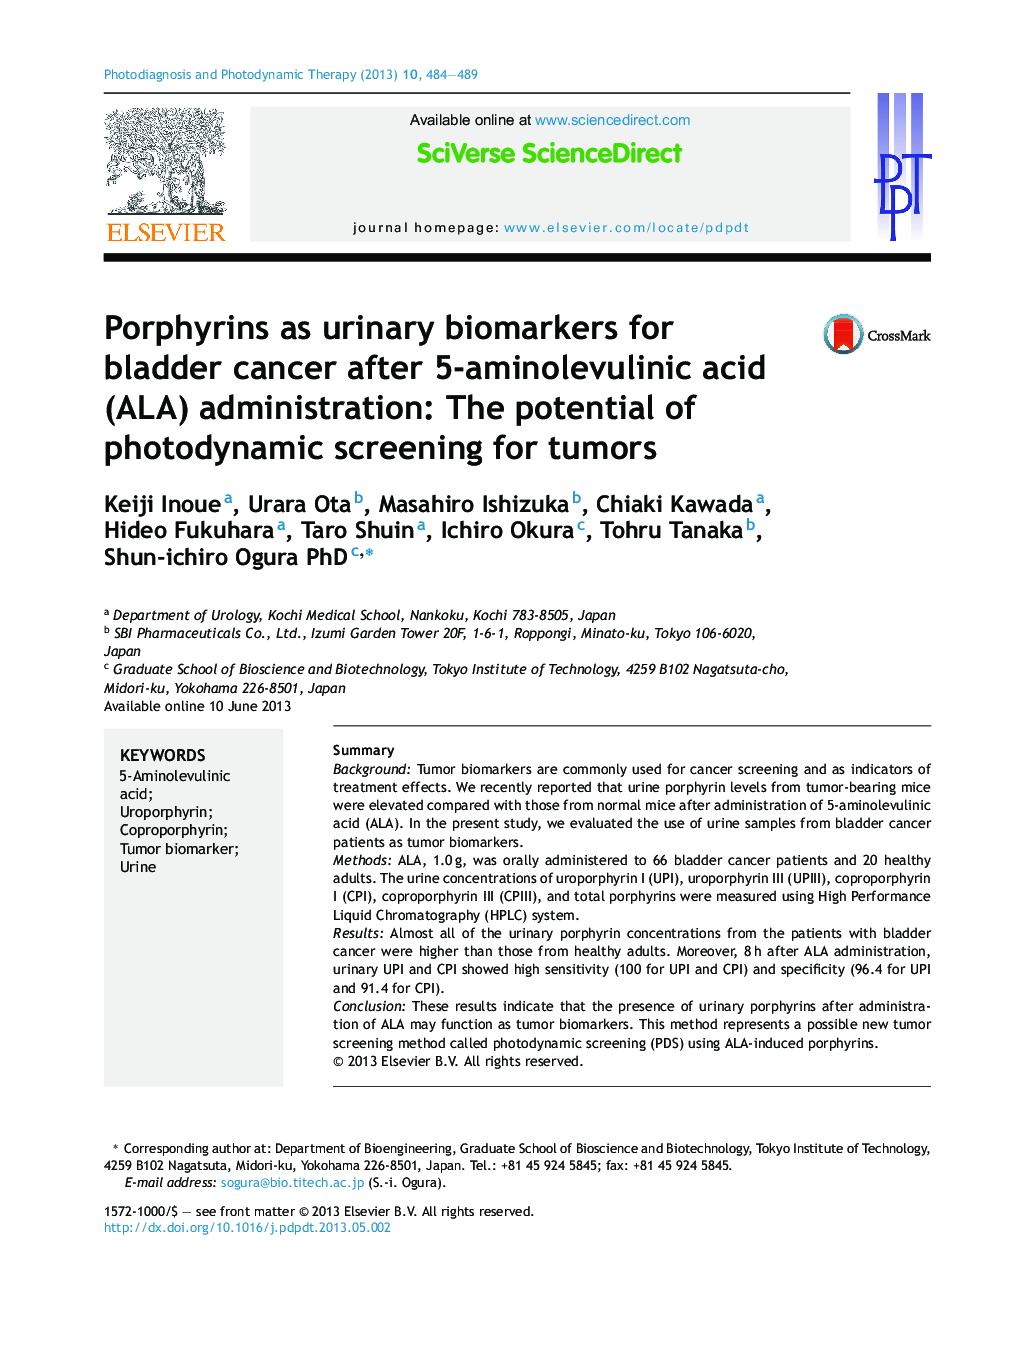 Porphyrins as urinary biomarkers for bladder cancer after 5-aminolevulinic acid (ALA) administration: The potential of photodynamic screening for tumors